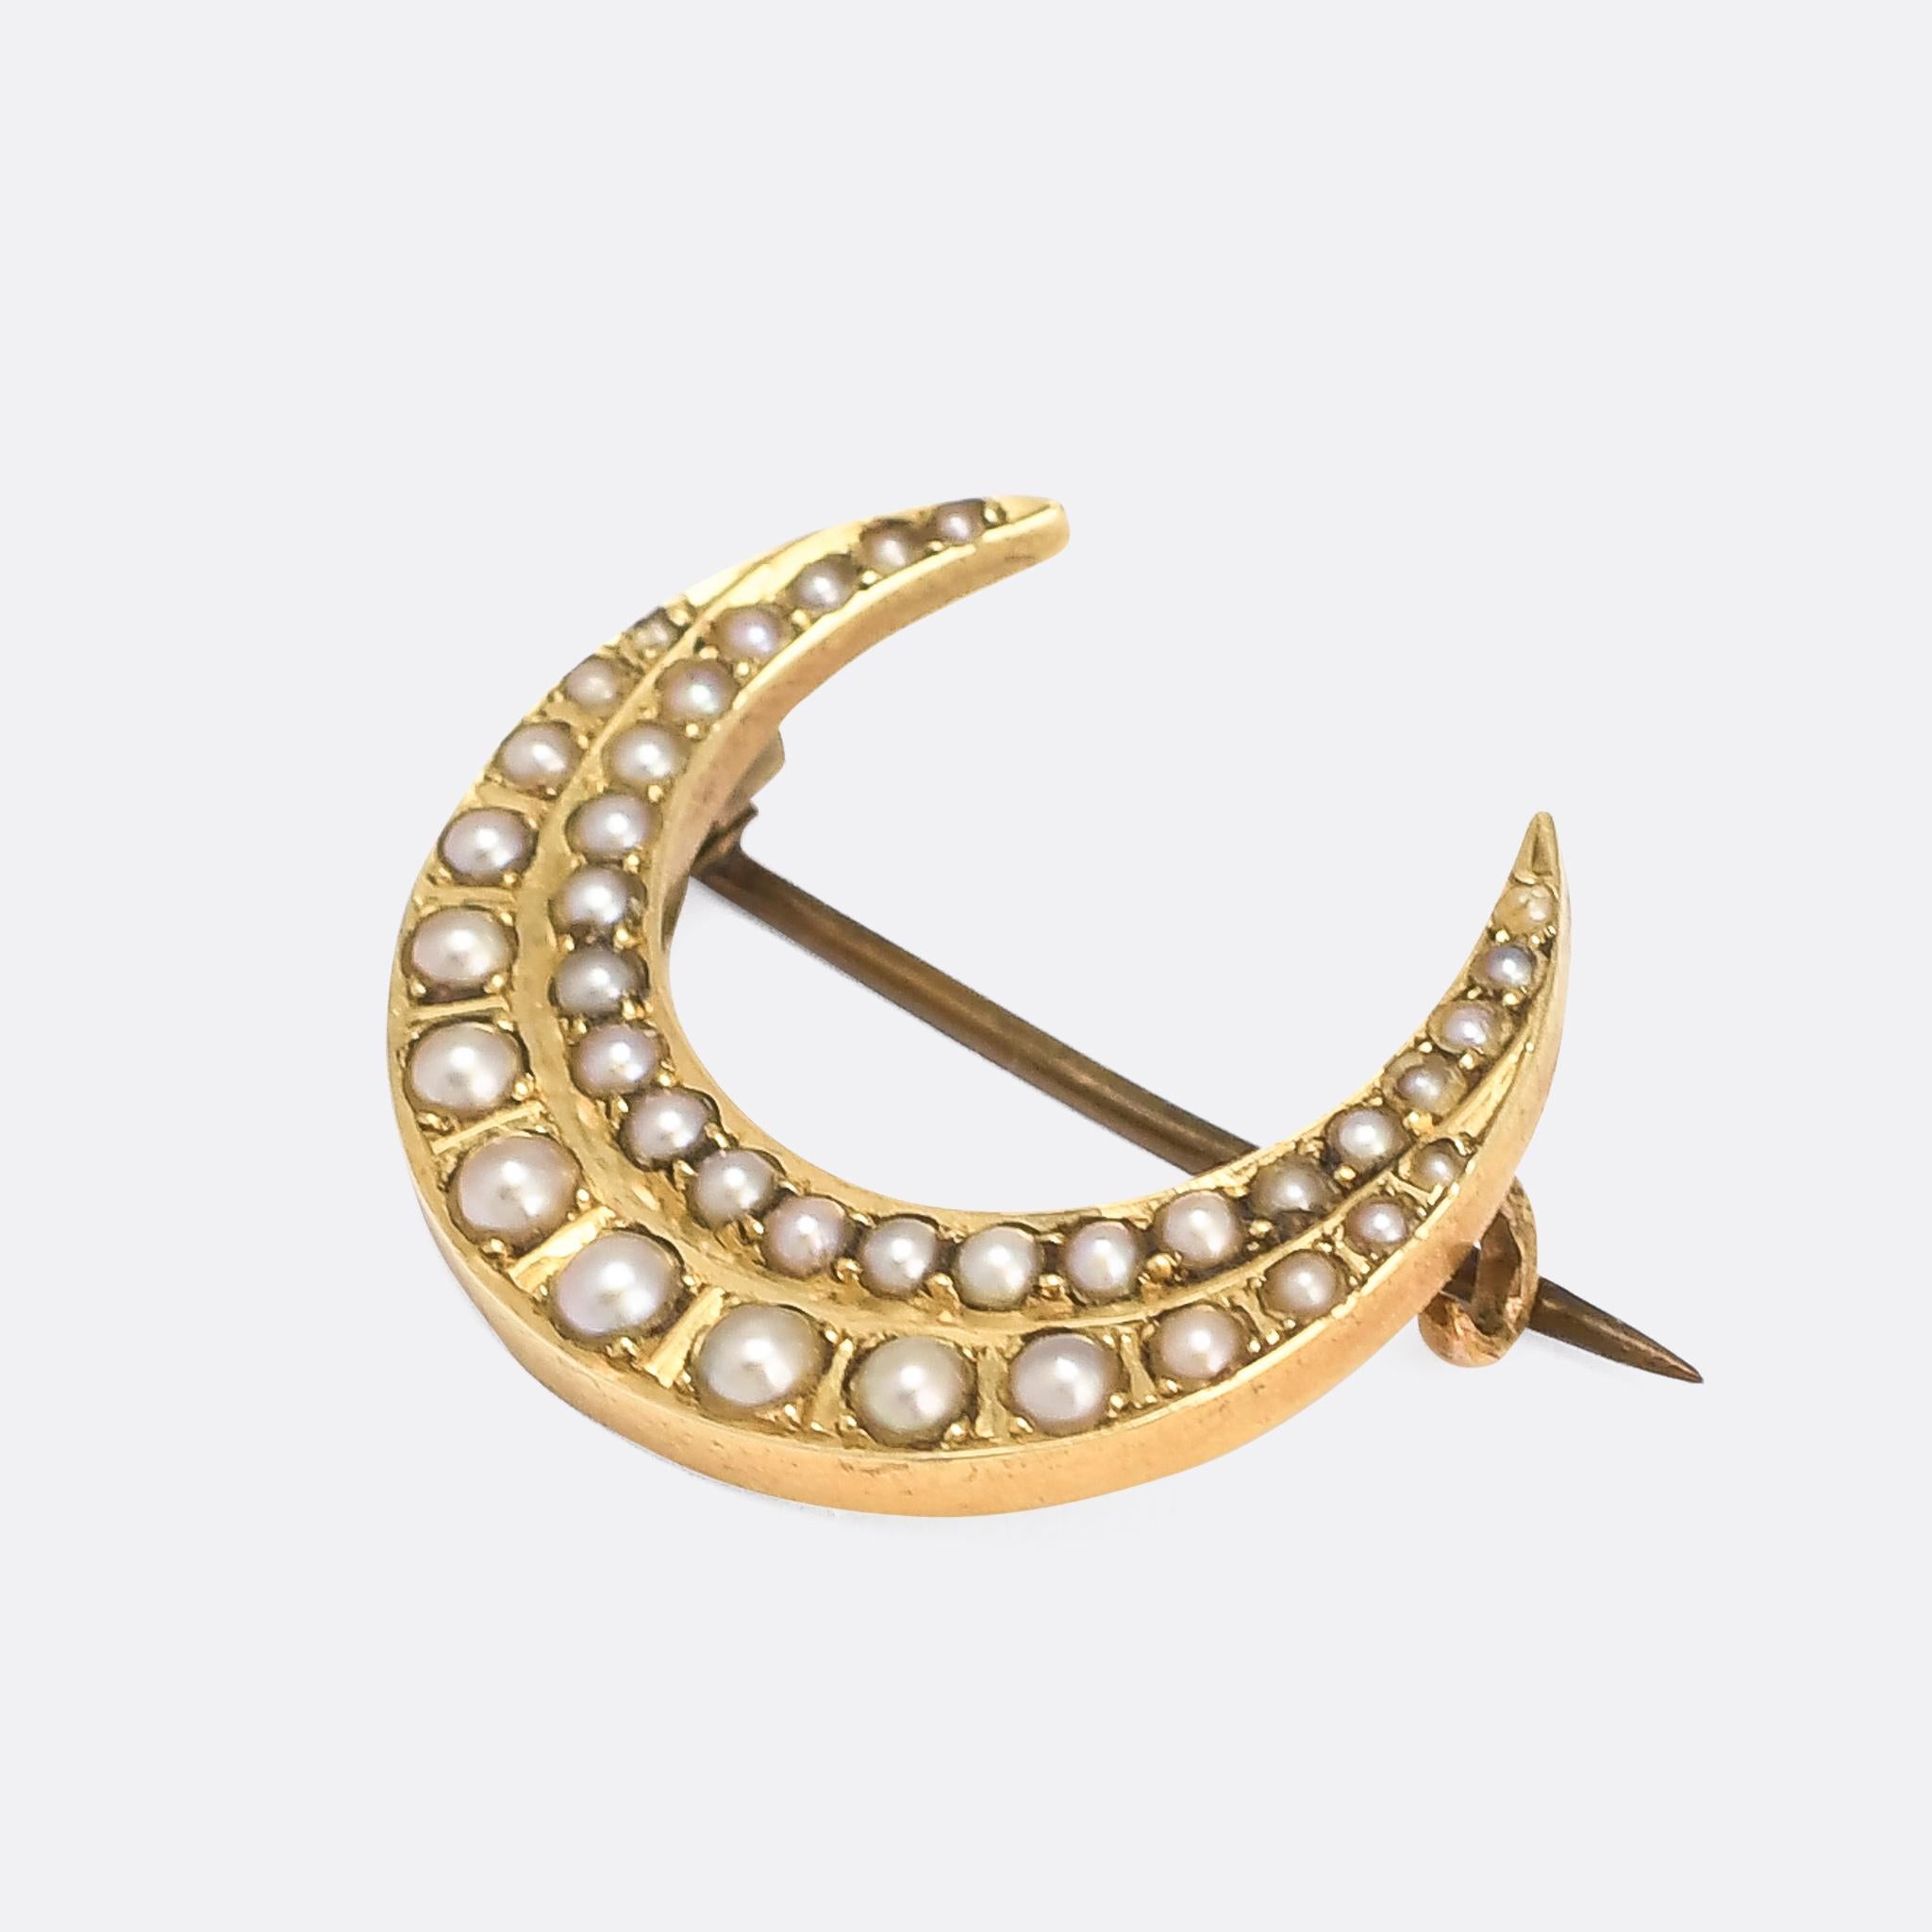 A gorgeous pearl set crescent moon brooch dating from the late Victorian period, circa 1880. It's crafted in 15 karat gold, and features two rows of natural pearls. If brooches aren't your thing, we can have a chain added for wear as a pendant - DM